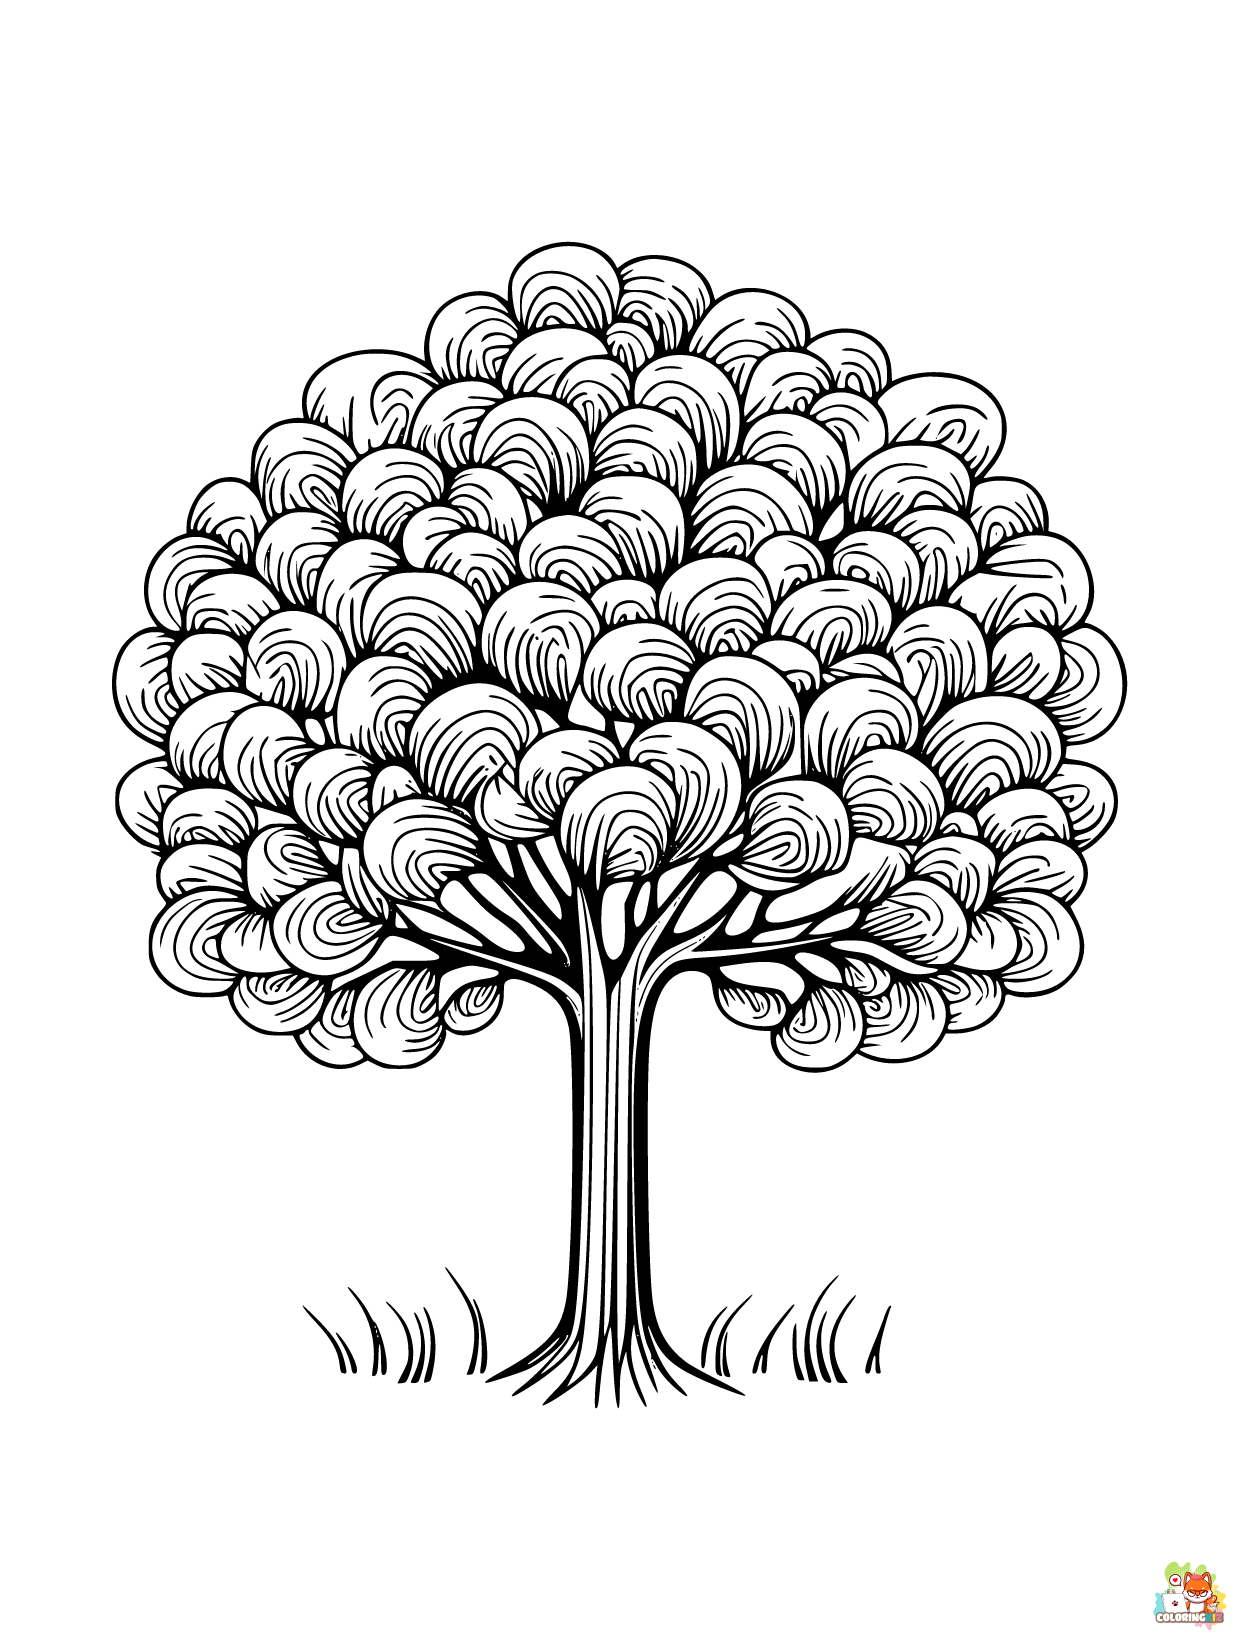 Tree coloring pages printable free